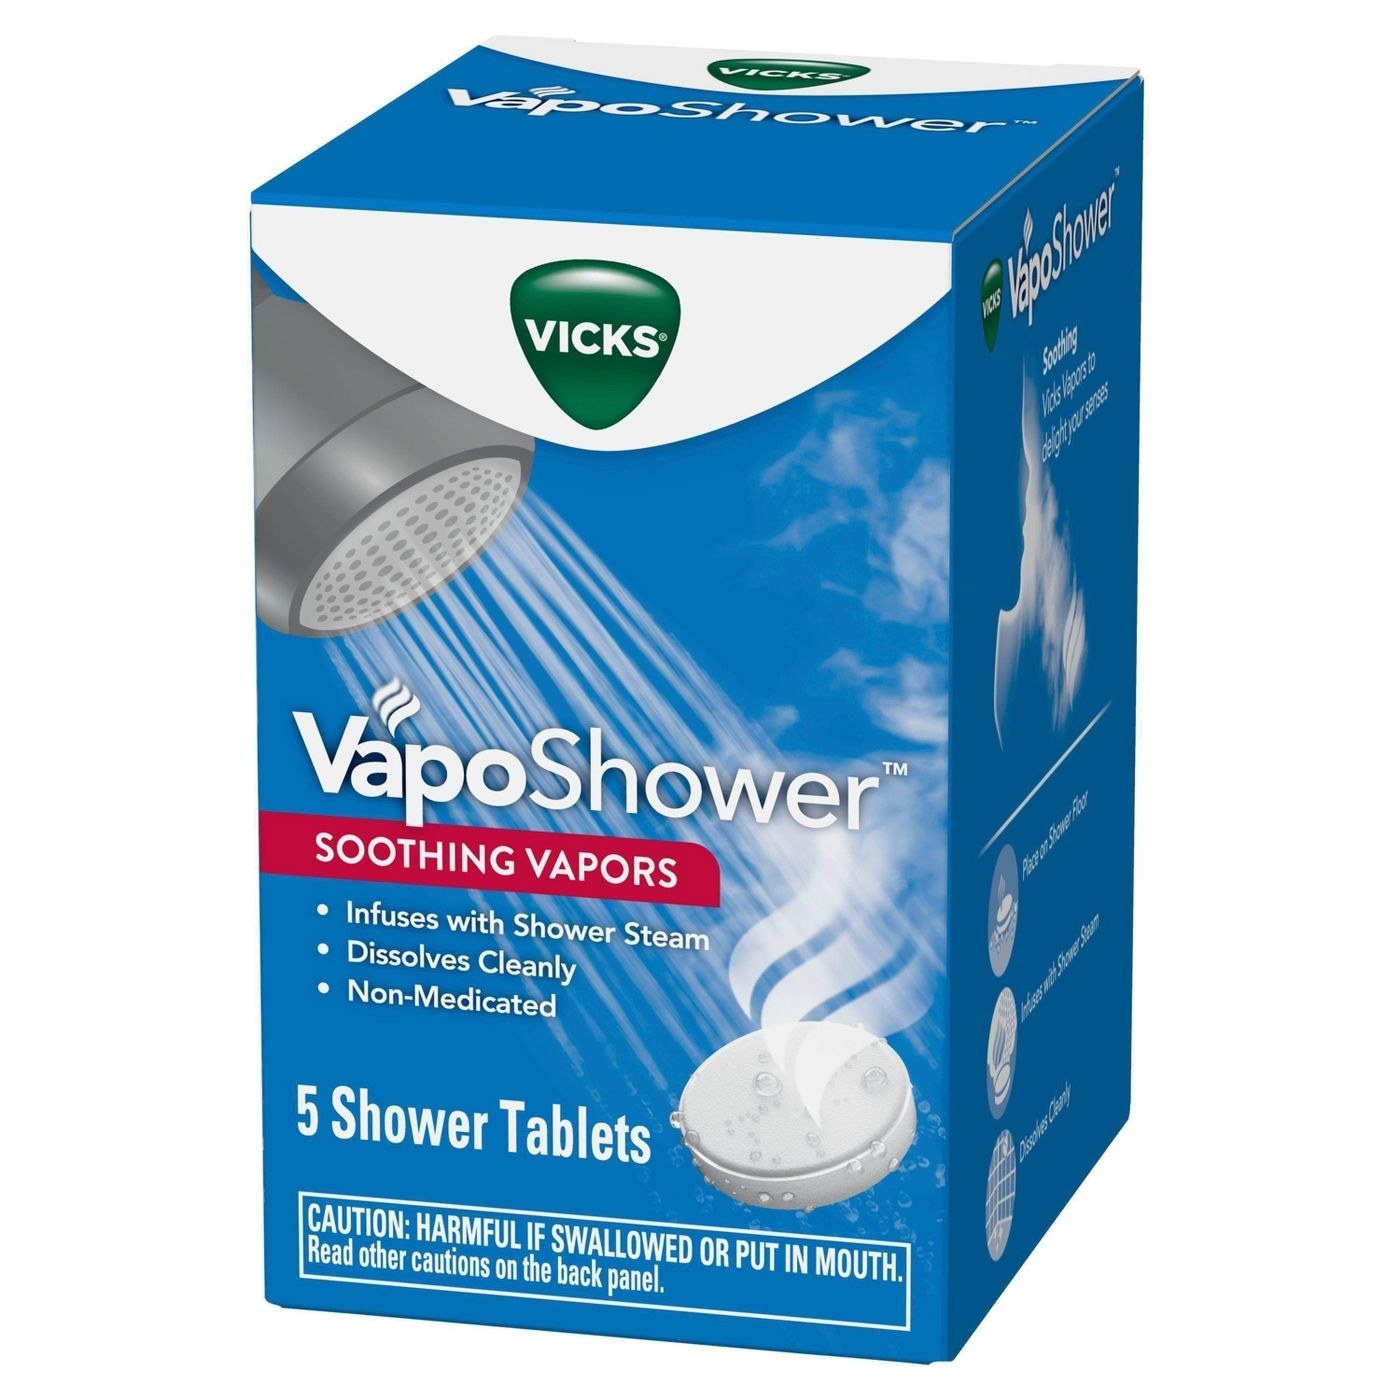 An image of a pack of soothing shower vapor tablets